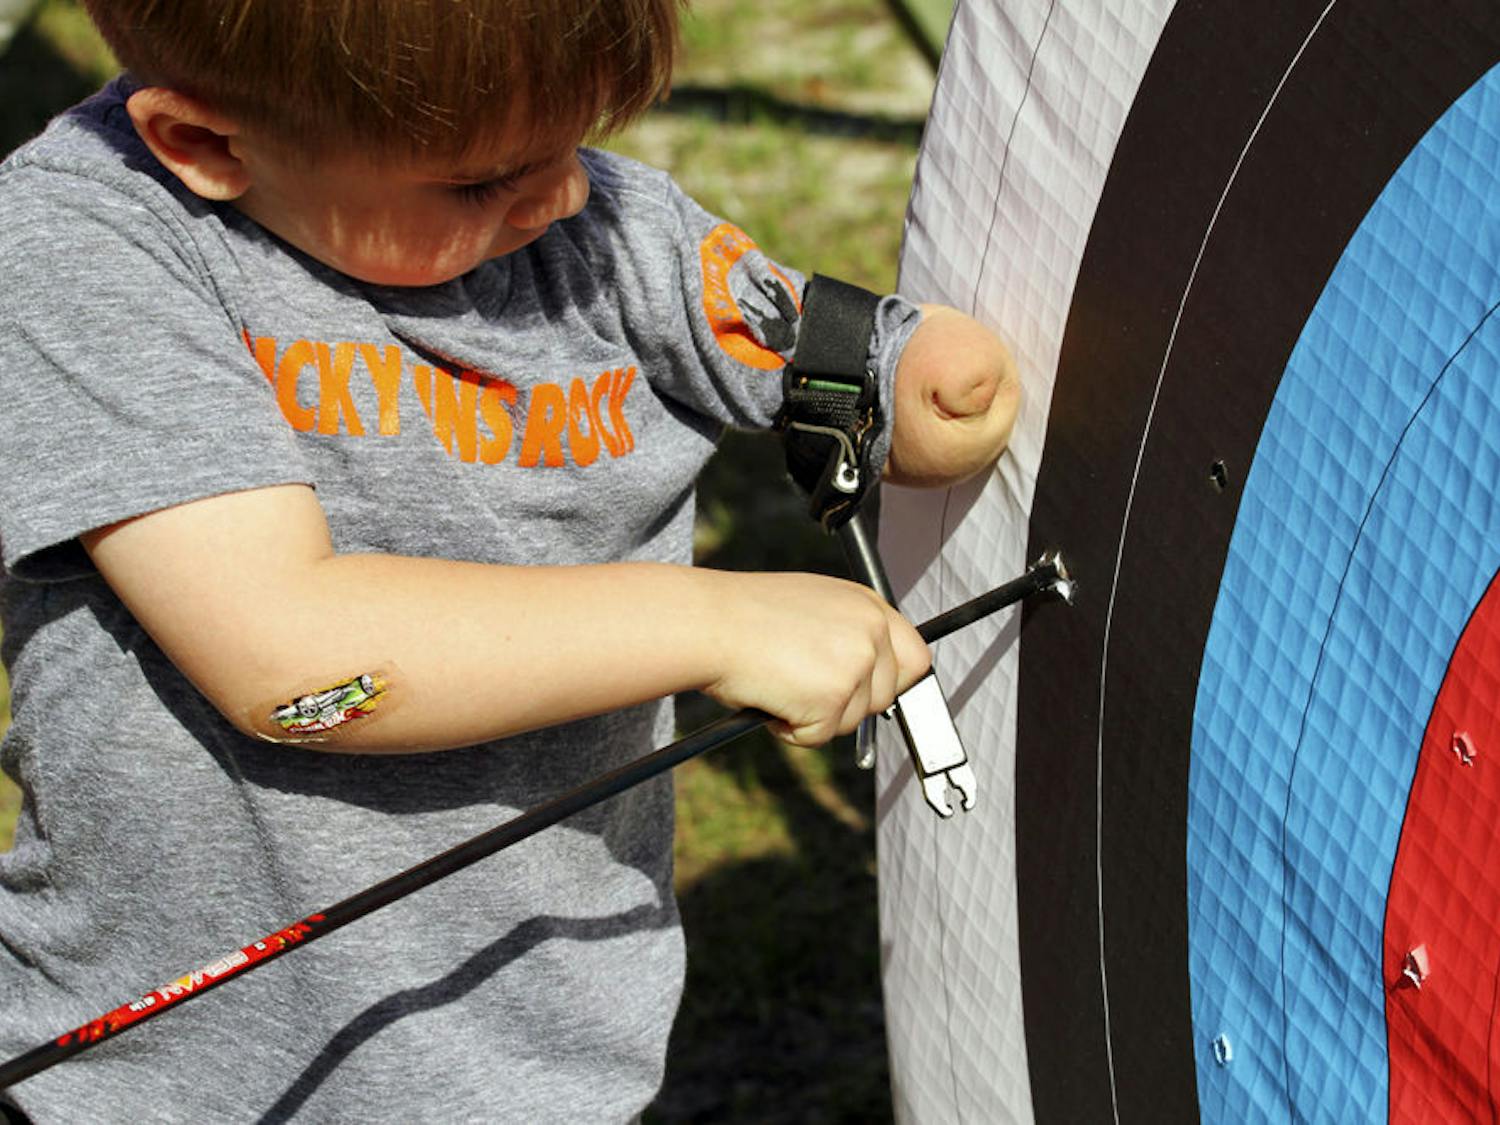 Above is a participant in Hand Camp. Children in the camp can take part in activities like archery or climbing. The camp’s motto is, “differences do not equal disability.”